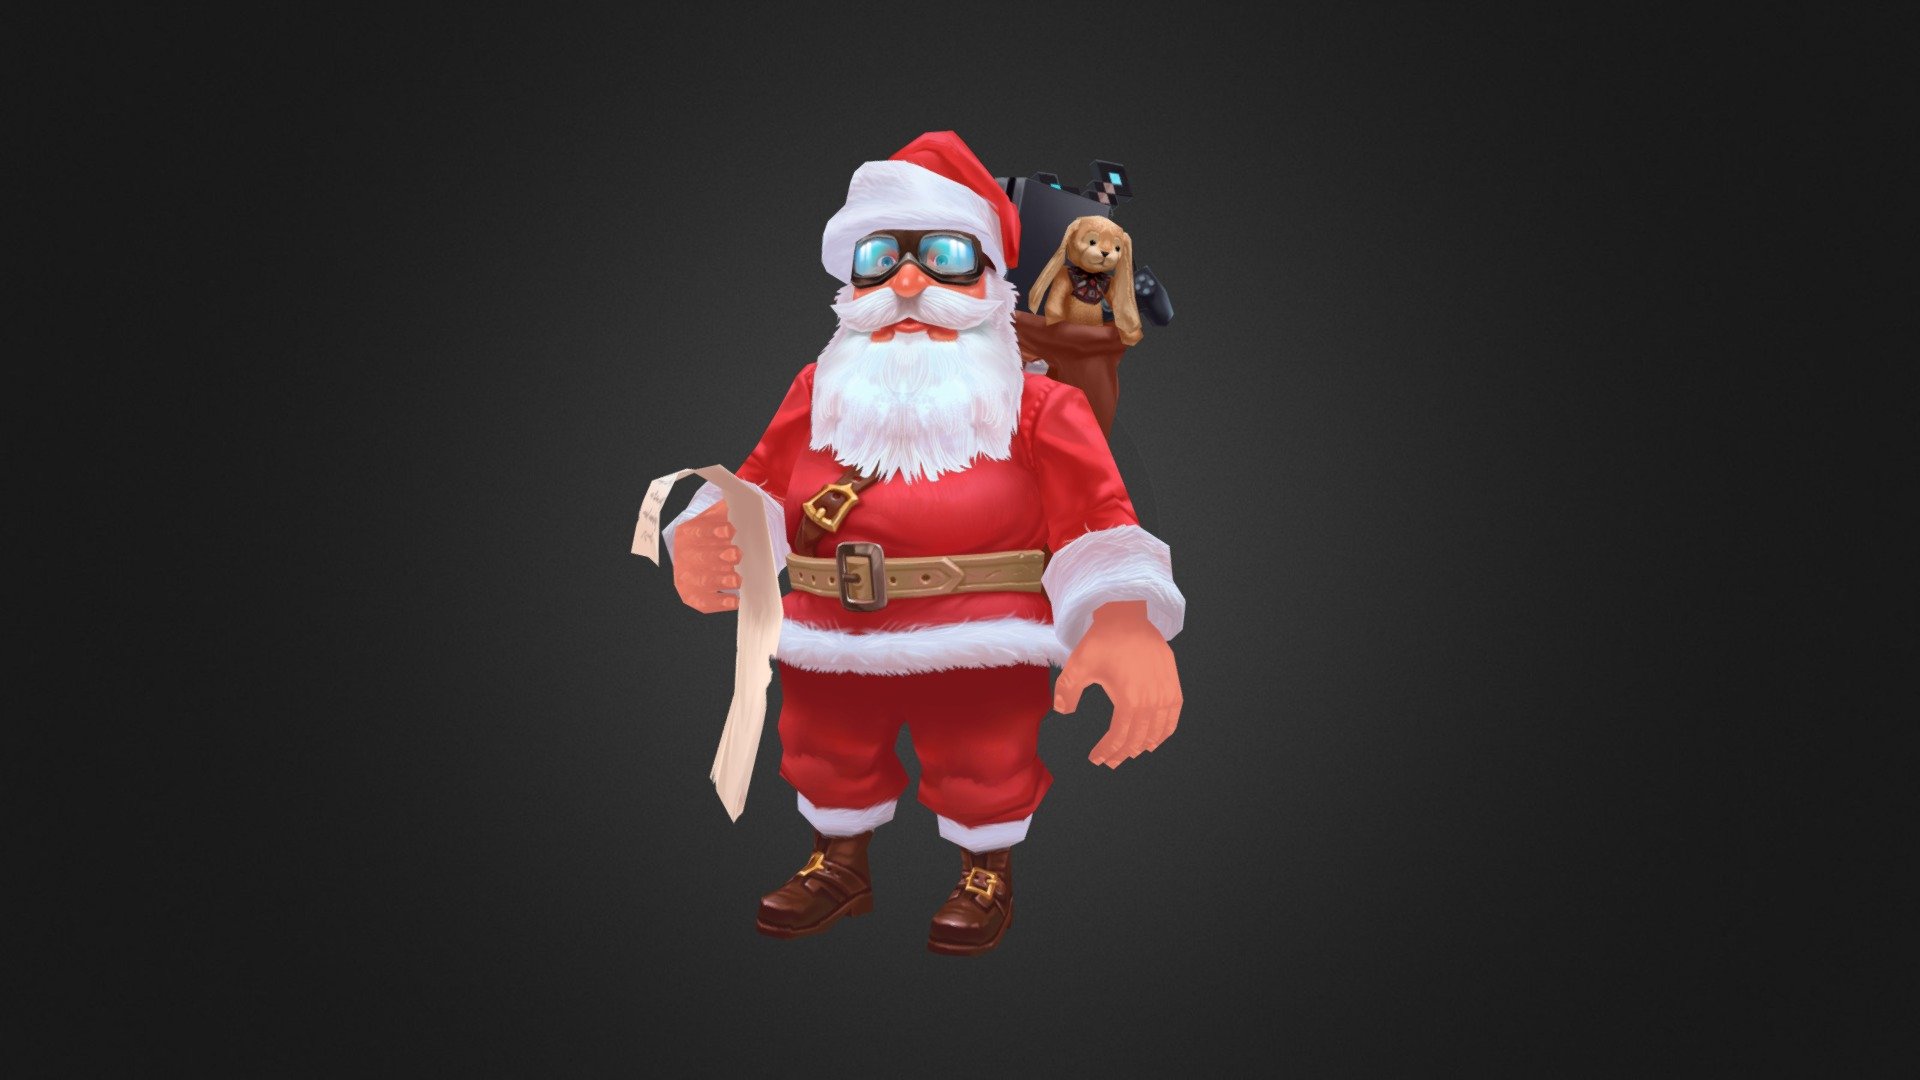 Here is our new work - “Santa”. It`s a low-poly model with hand-painted texture. Made for Guardians of Dreams game by MegaFun Entertainment. 
https://play.google.com/store/apps/details?id=com.dw.ru - Santa - 3D model by SunStrike Studios (@sunstrikestudios) 3d model